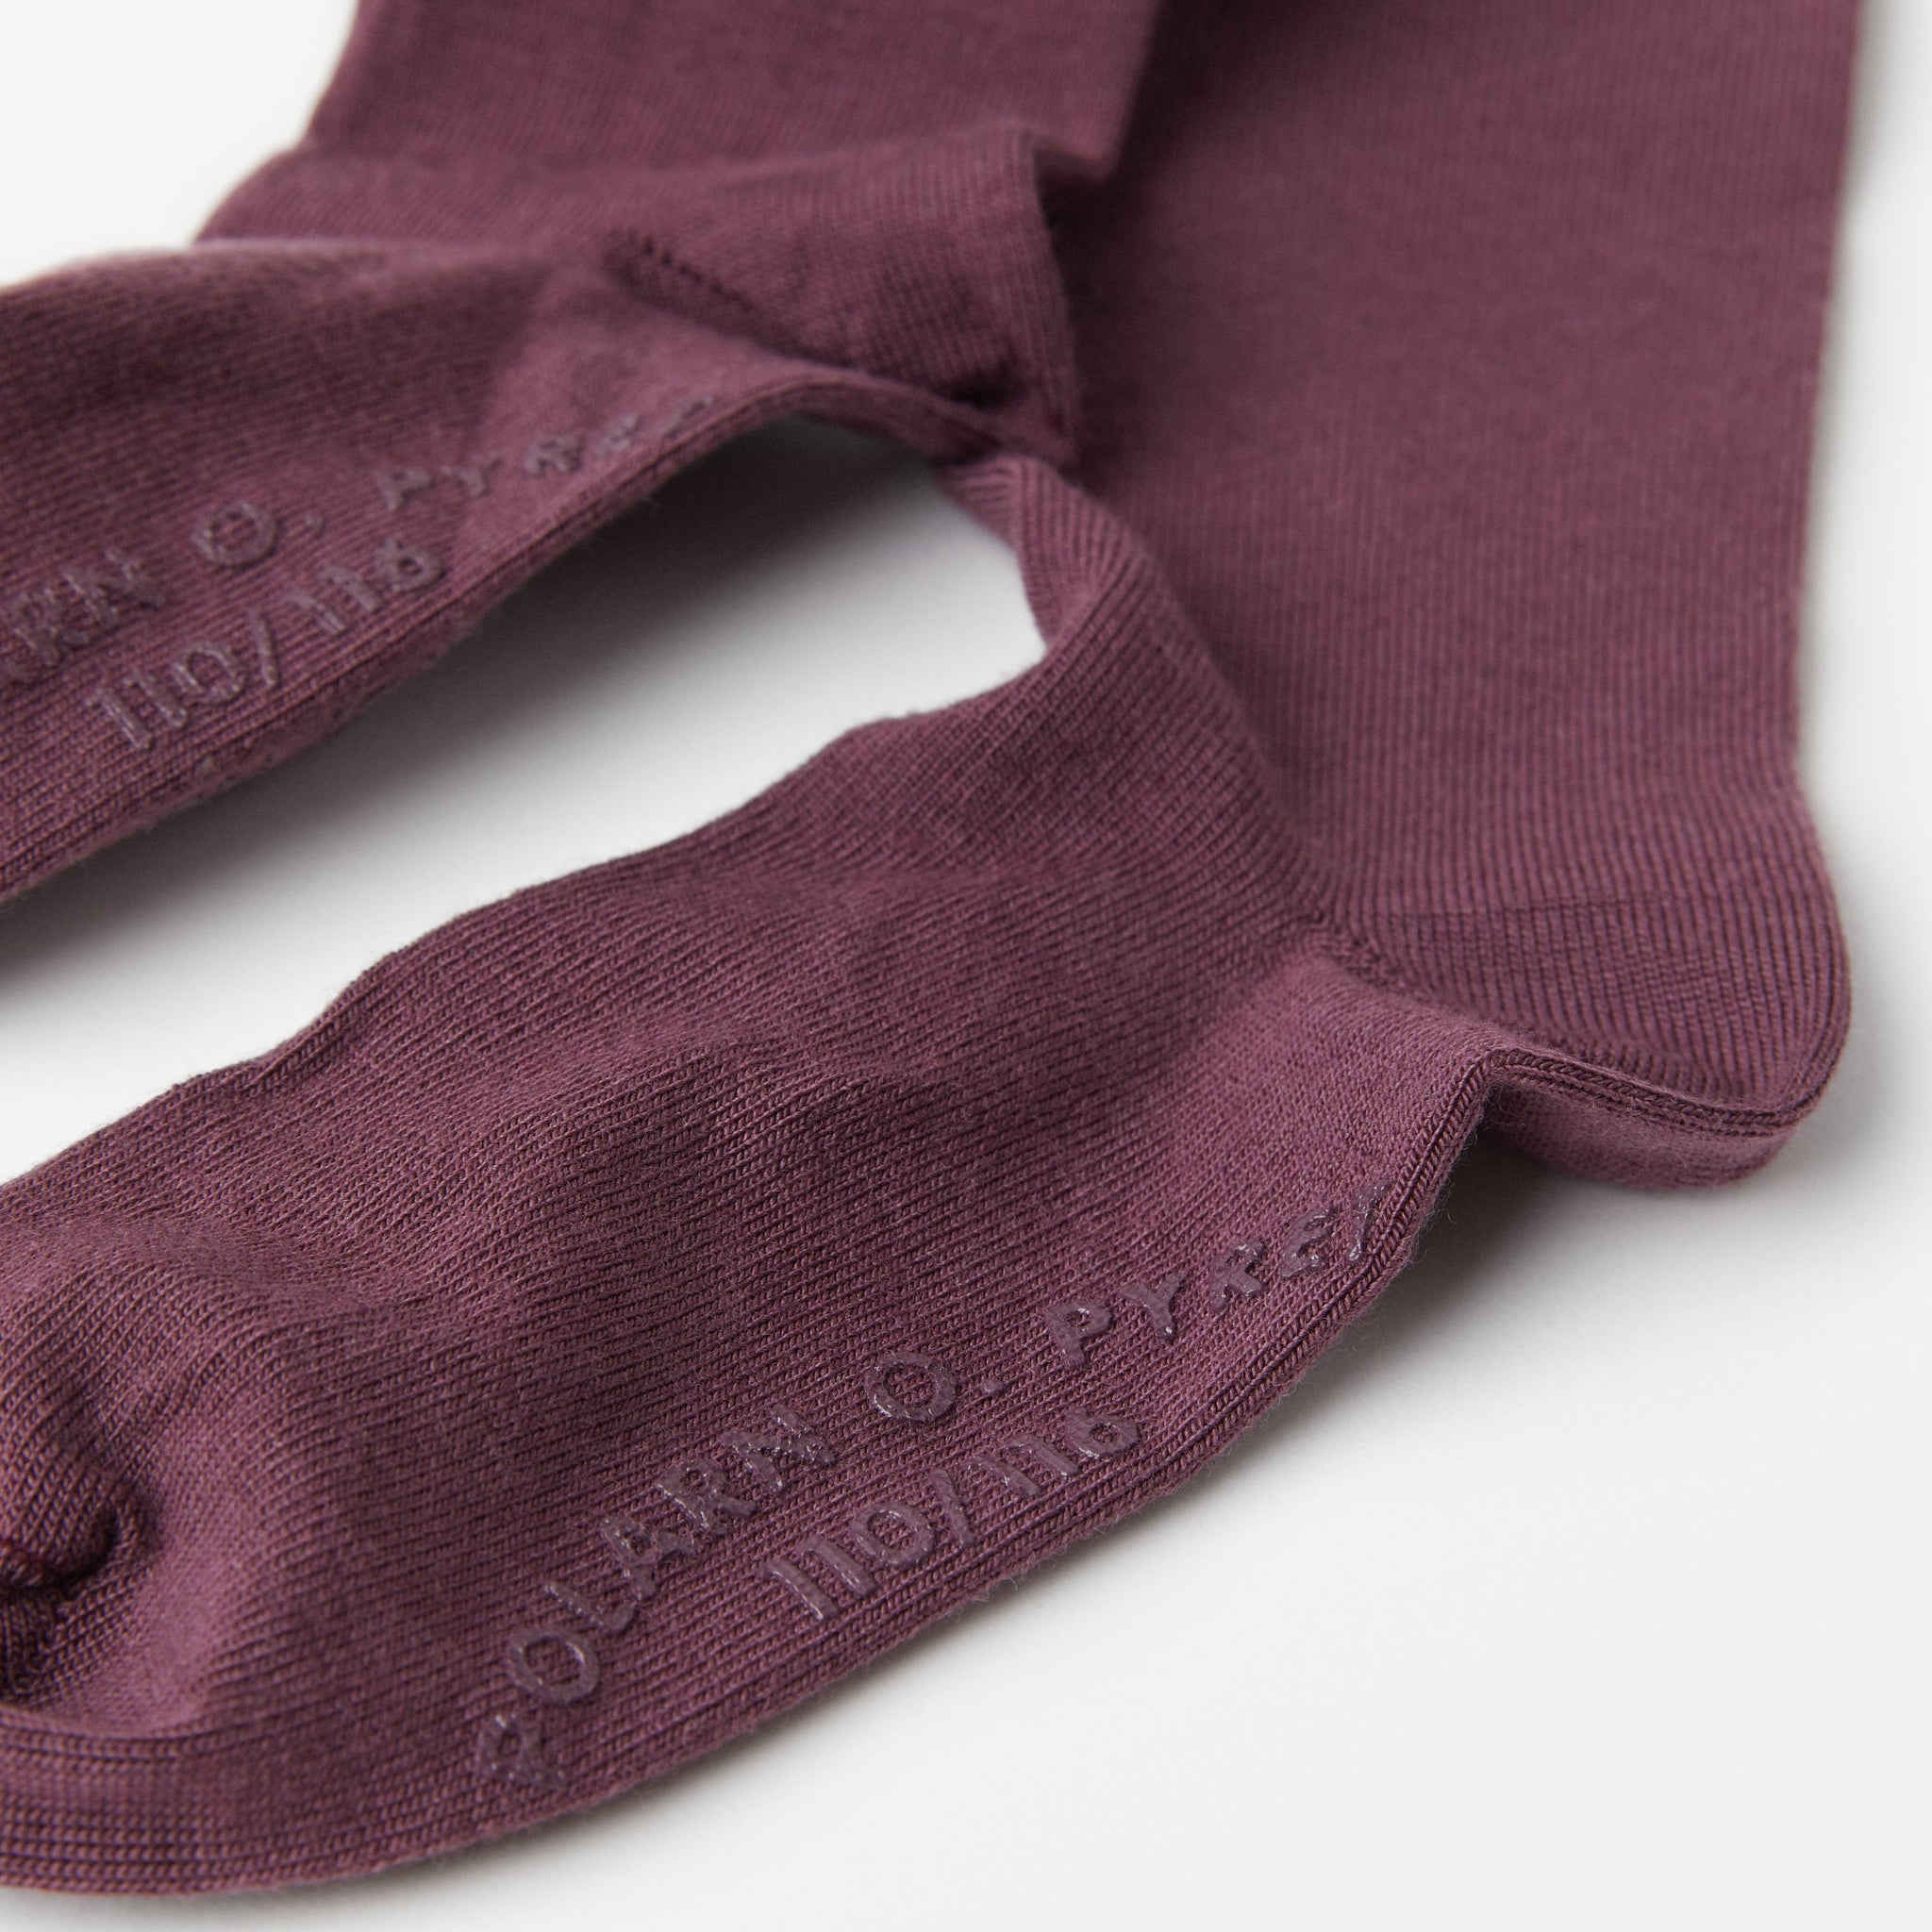 Merino Burgundy Antislip Kids Tights from the Polarn O. Pyret kidswear collection. Sustainably produced kids outerwear.